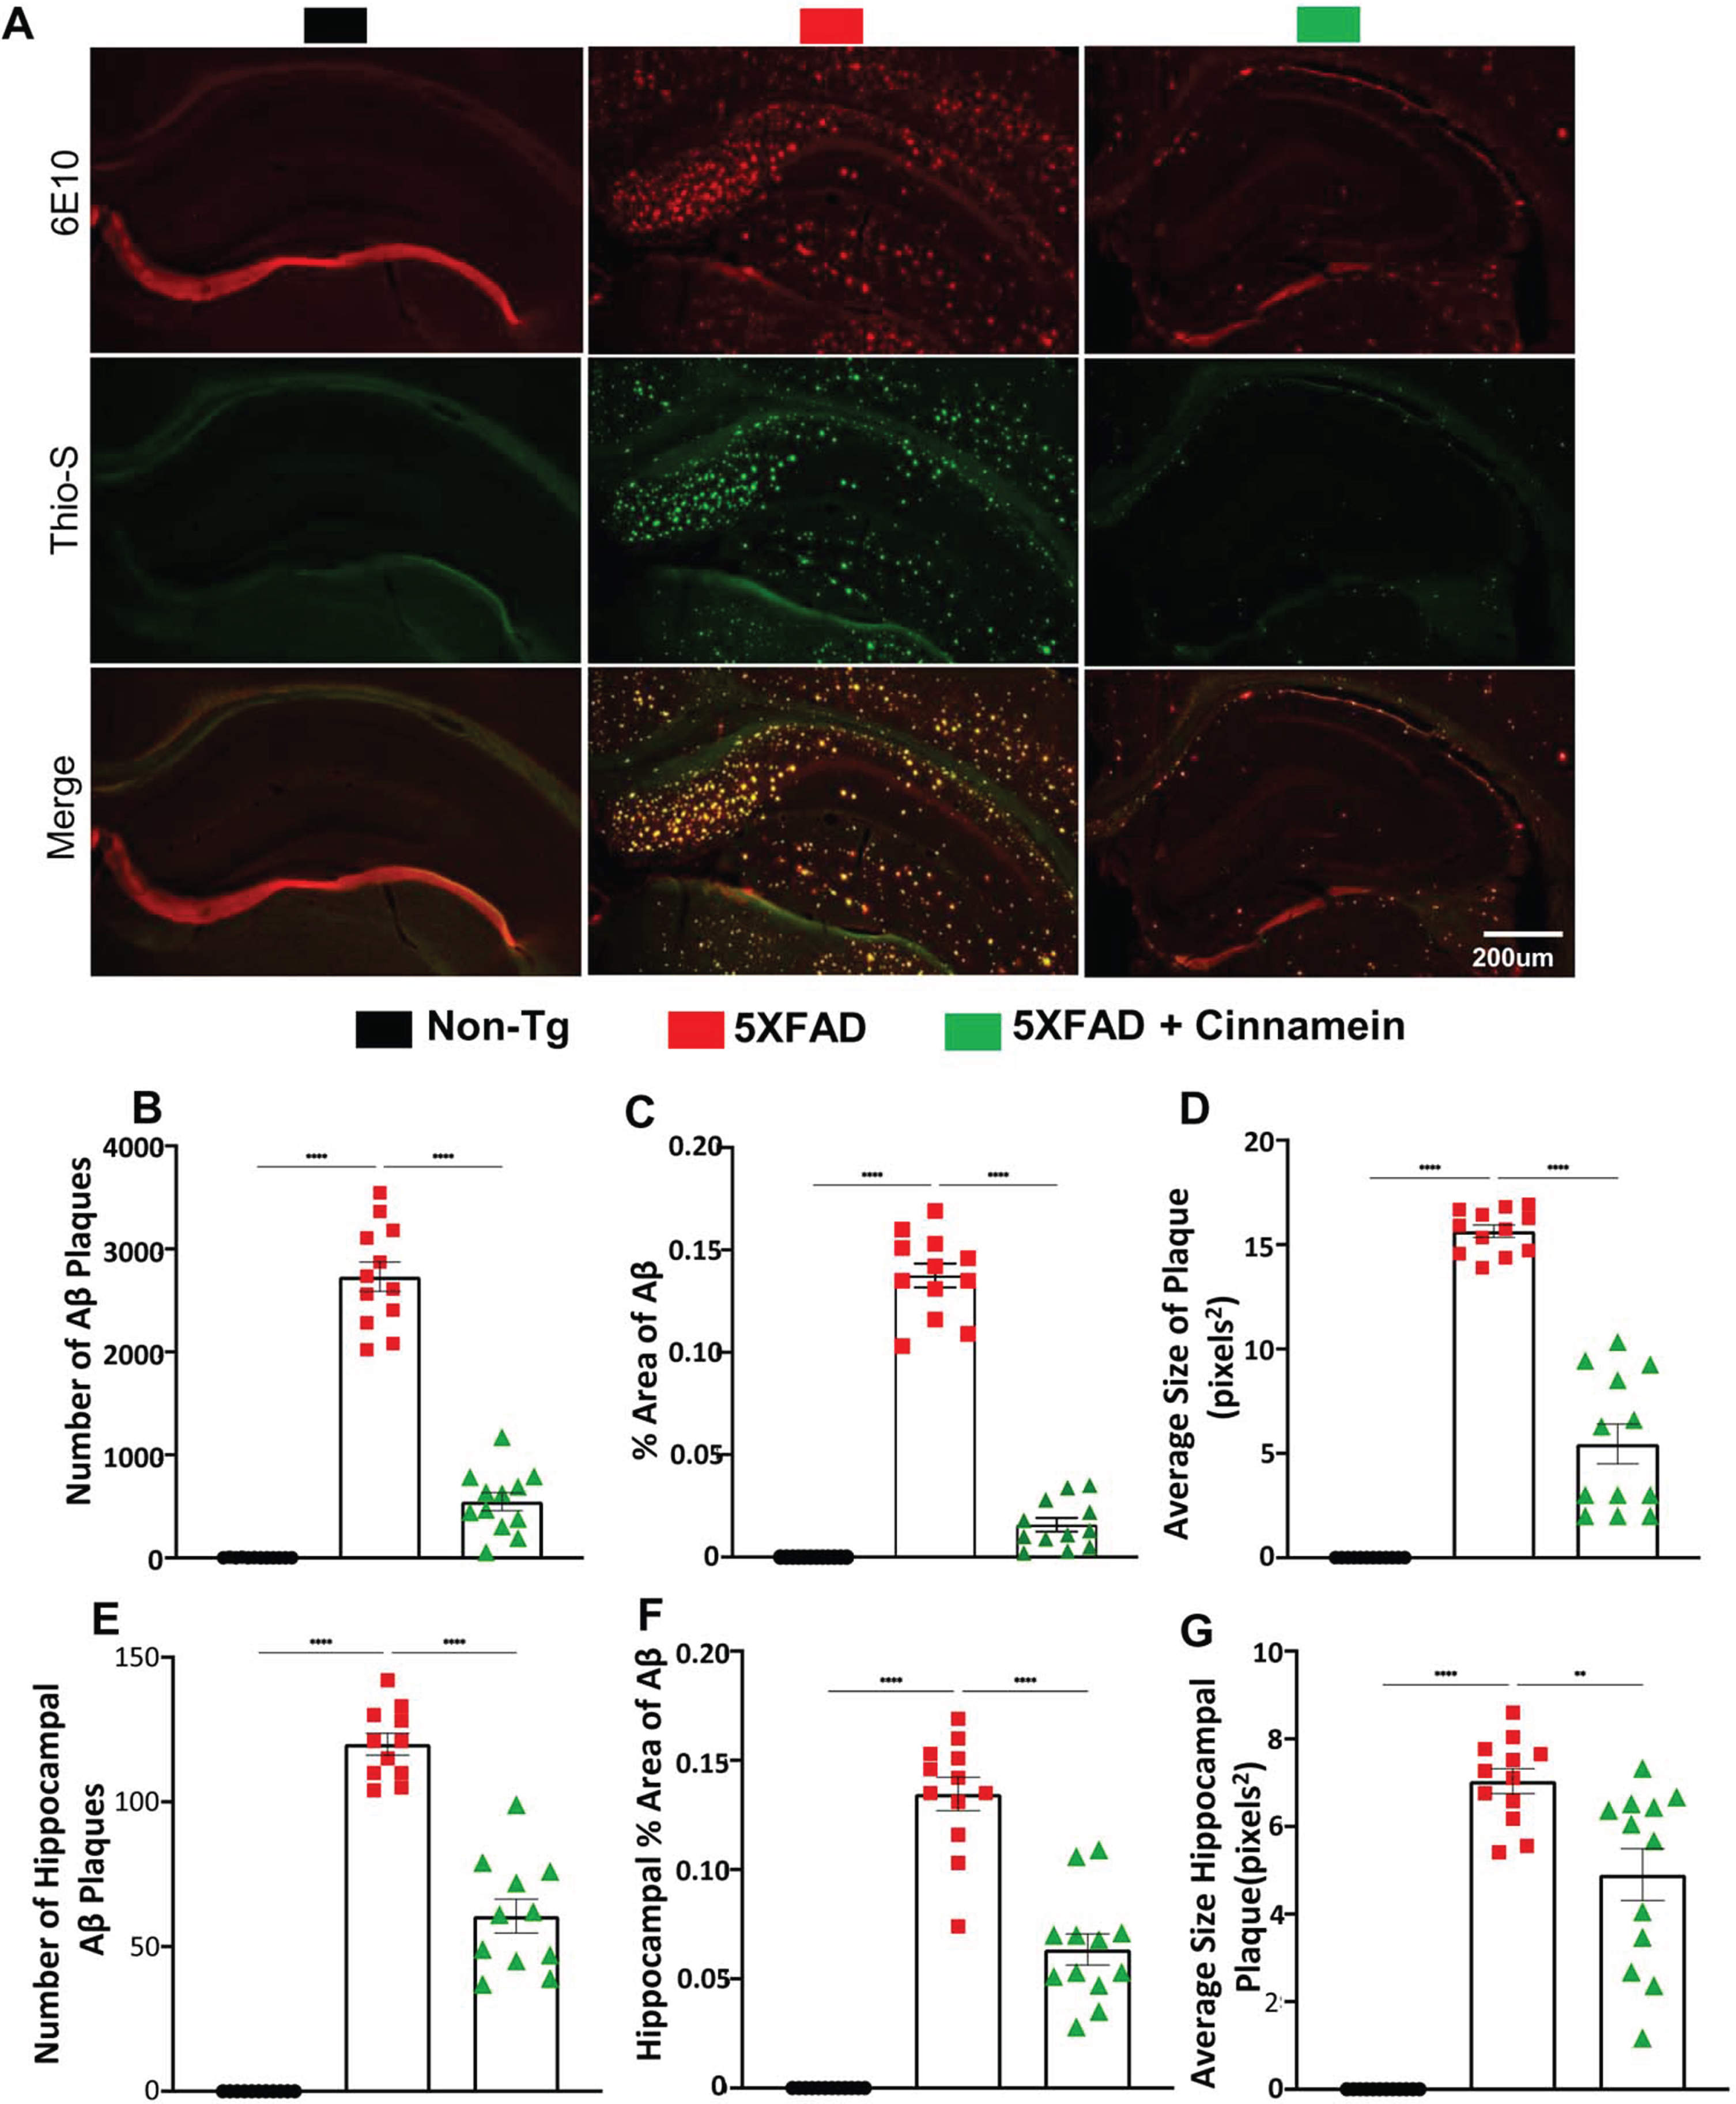 Cinnamein attenuates Aβ plaque pathology and protein aggregates. Six-month-old 5XFAD mice (n = 6) were treated with cinnamein orally (50 mg/kg/day) via gavage for one month followed by monitoring amyloid plaque load by double-label immunofluorescence for 6E10 and Thio-S (A). Image J was used to quantify the number of Aβ plaques (B, whole brain; E, hippocampus), % area of Aβ plaques (C, whole brain; F, hippocampus) and average size of Aβ plaques (D, whole brain; G, hippocampus) in two sections of each of six mice per group. All data, analyzed with Prism, represent the mean±SEM. One-way ANOVA followed by Šìdák’s multiple comparisons test was used for statistical analysis. **p < 0.01; ****p < 0.0001.